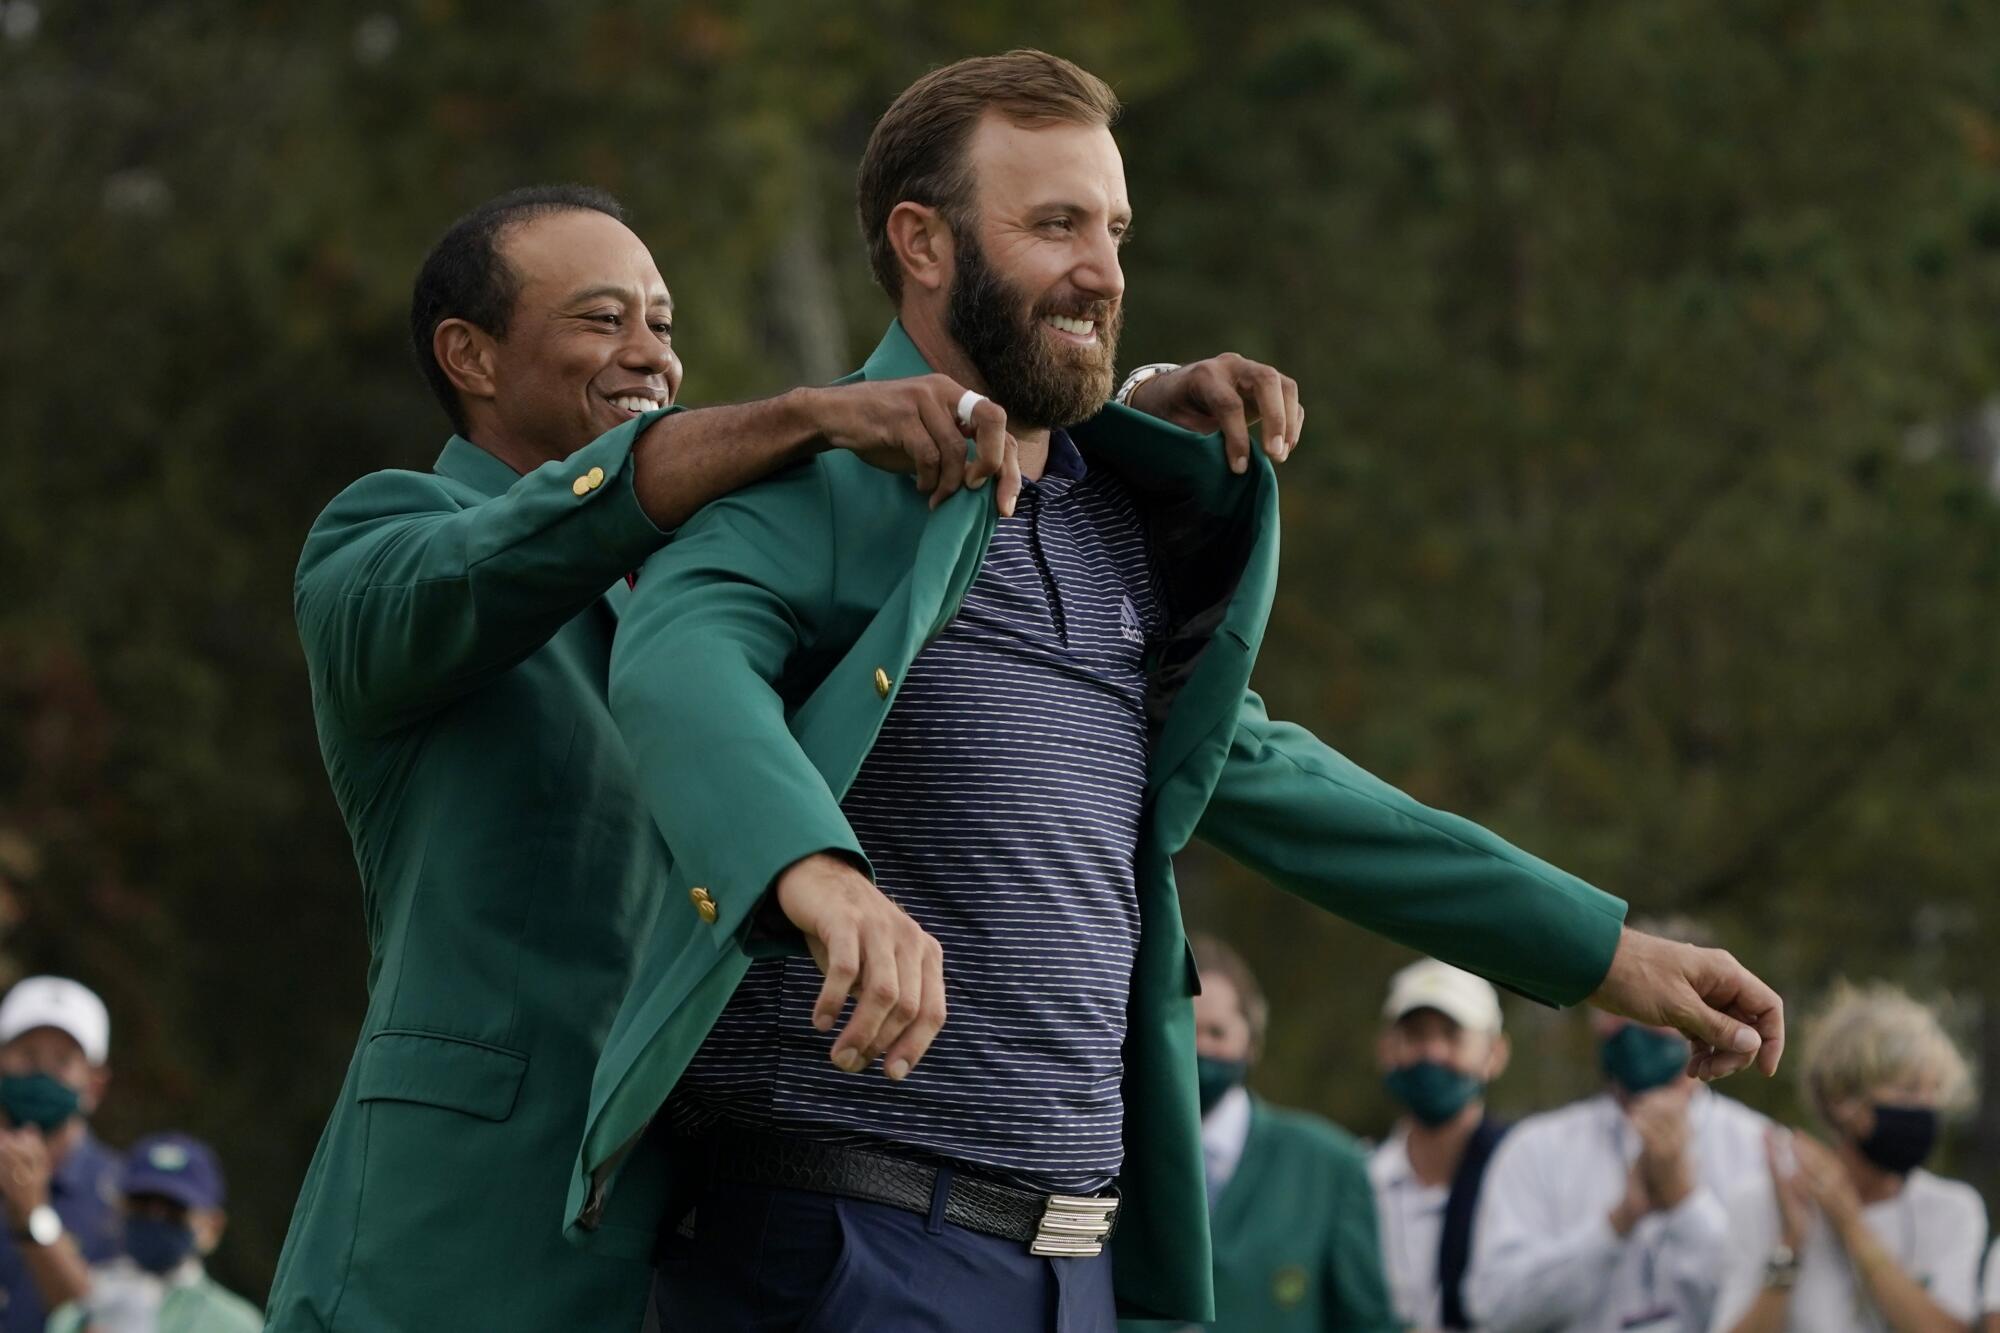 Tiger Woods helps Masters' champion Dustin Johnson with his green jacket after his victory at the Masters in 2020.